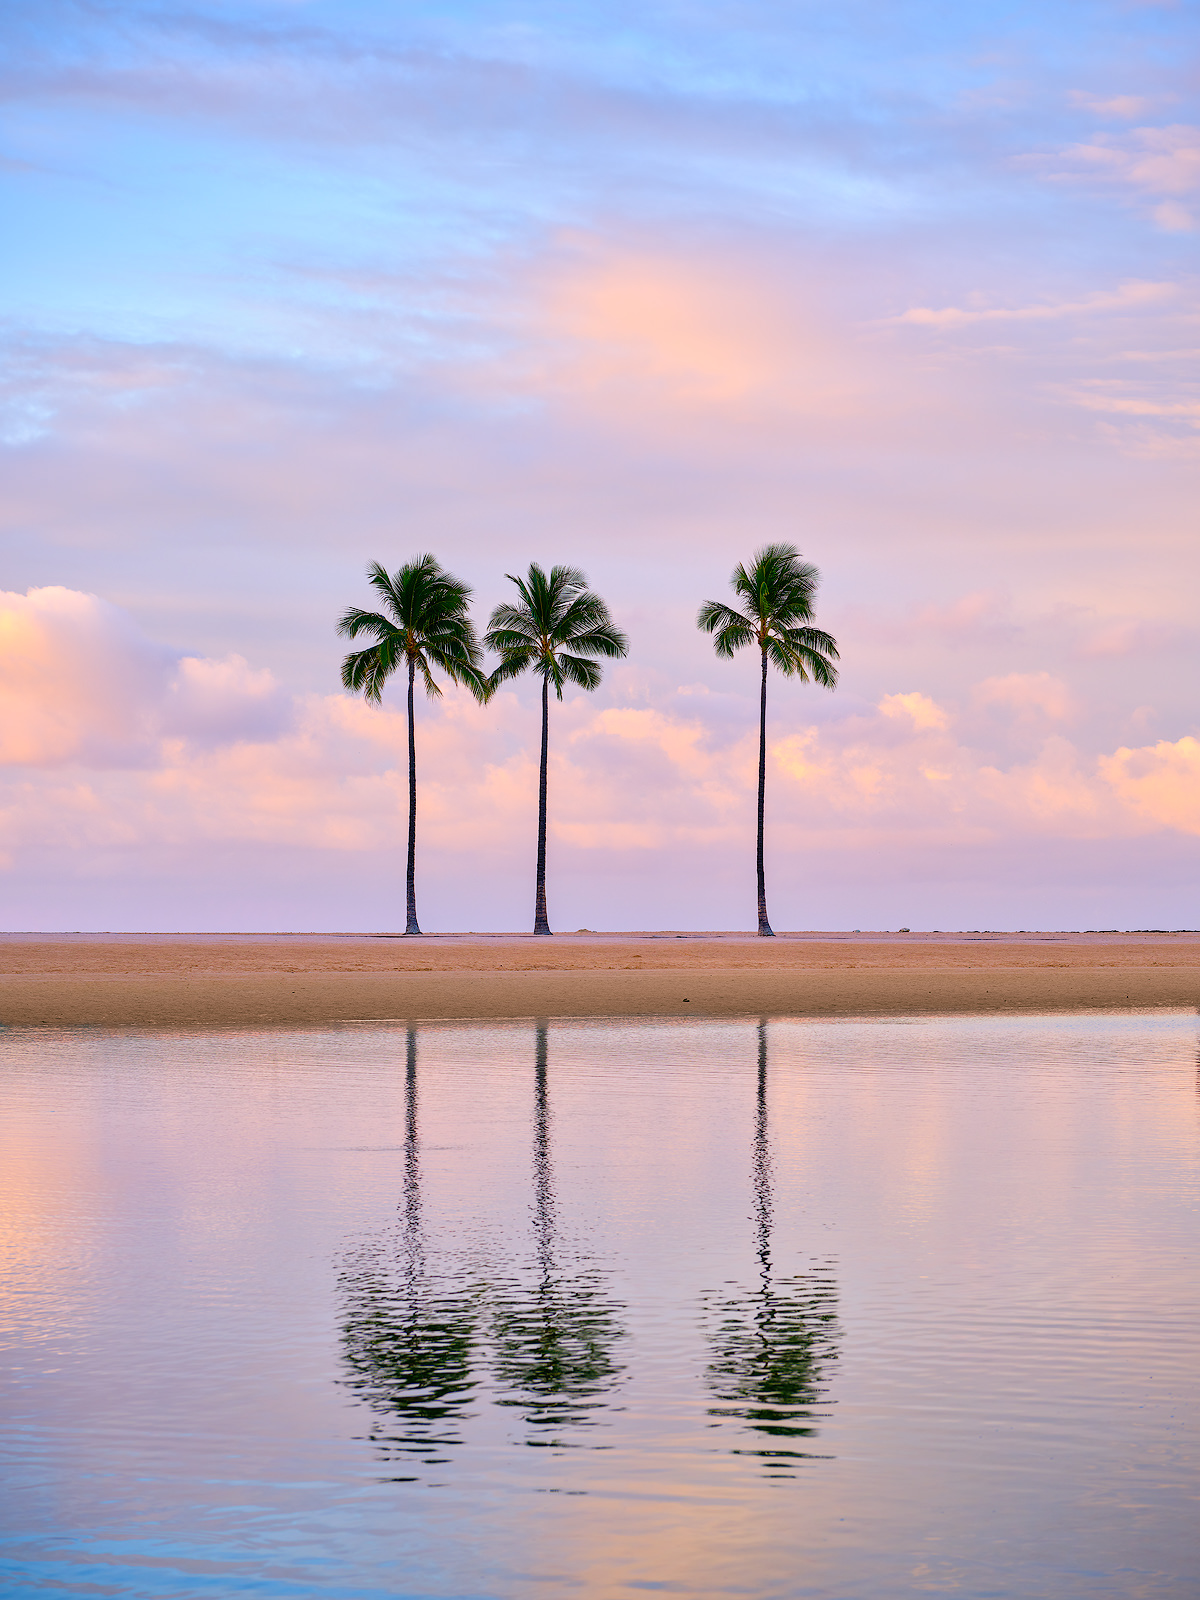 3 coconut palm trees reflecting in a lagoon along Waikiki beach at sunrise on the Hawaiian island of Oahu.  Oahu Landscape Photography by Andrew Shoemaker